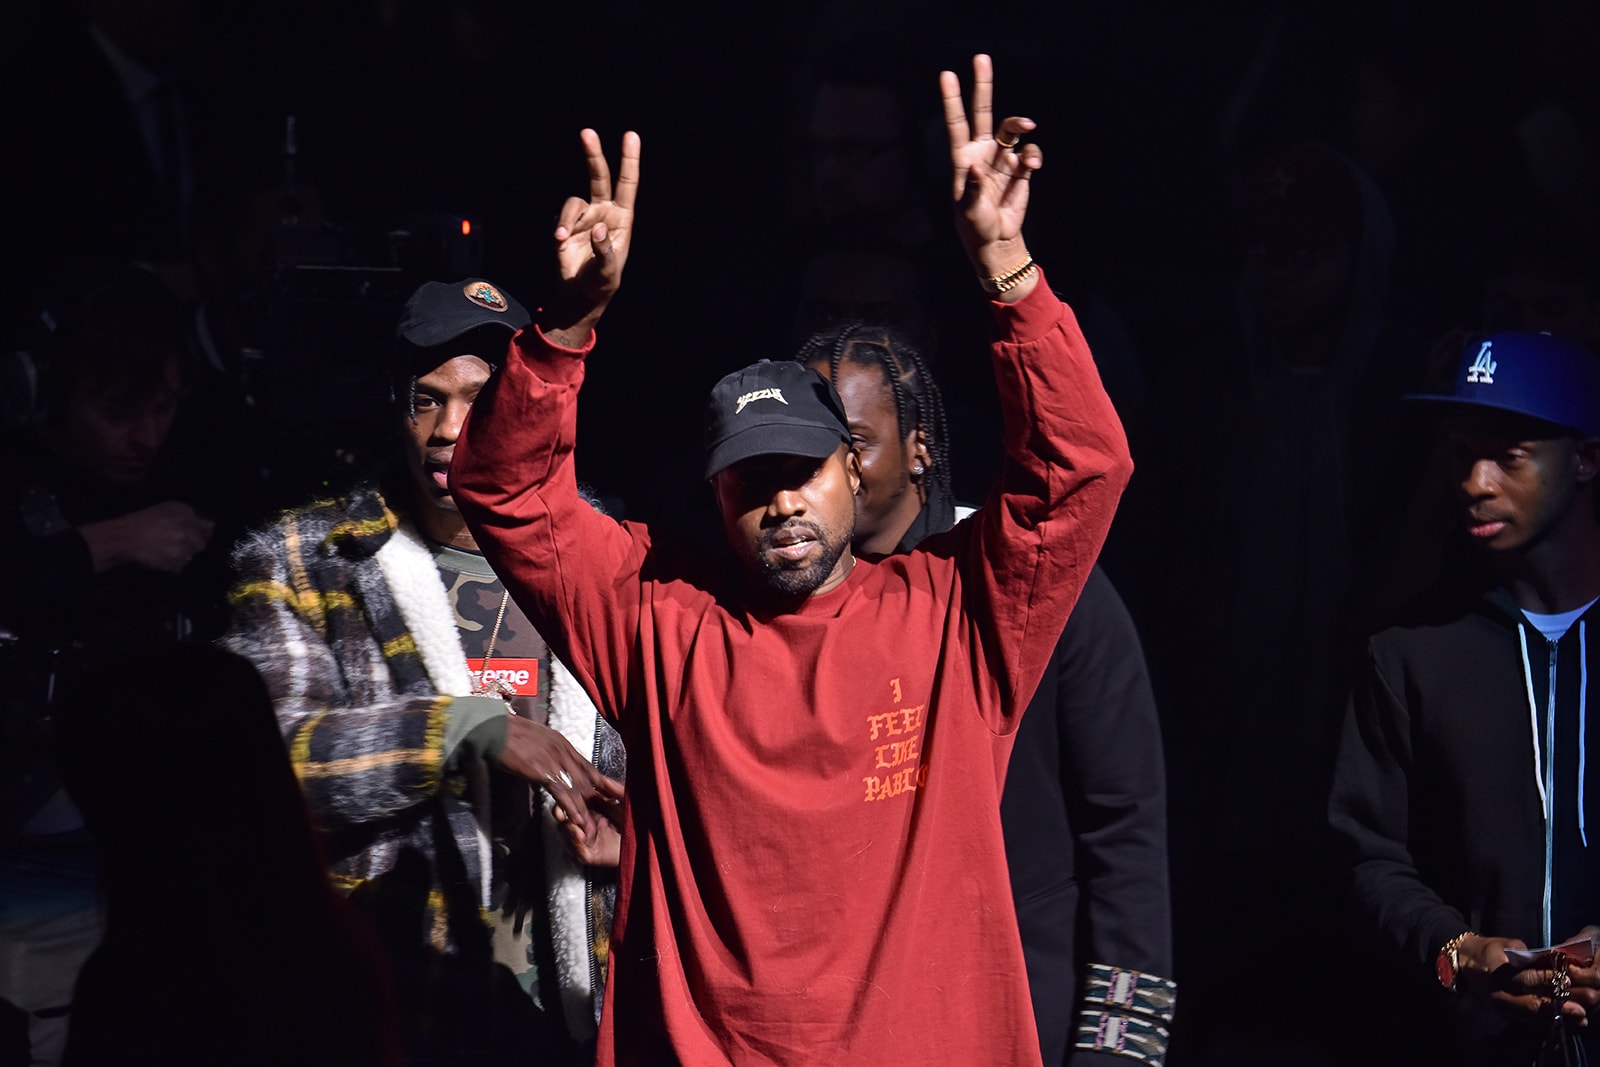 Kanye West Is Now a Billionaire, Thanks Mostly to His Yeezy